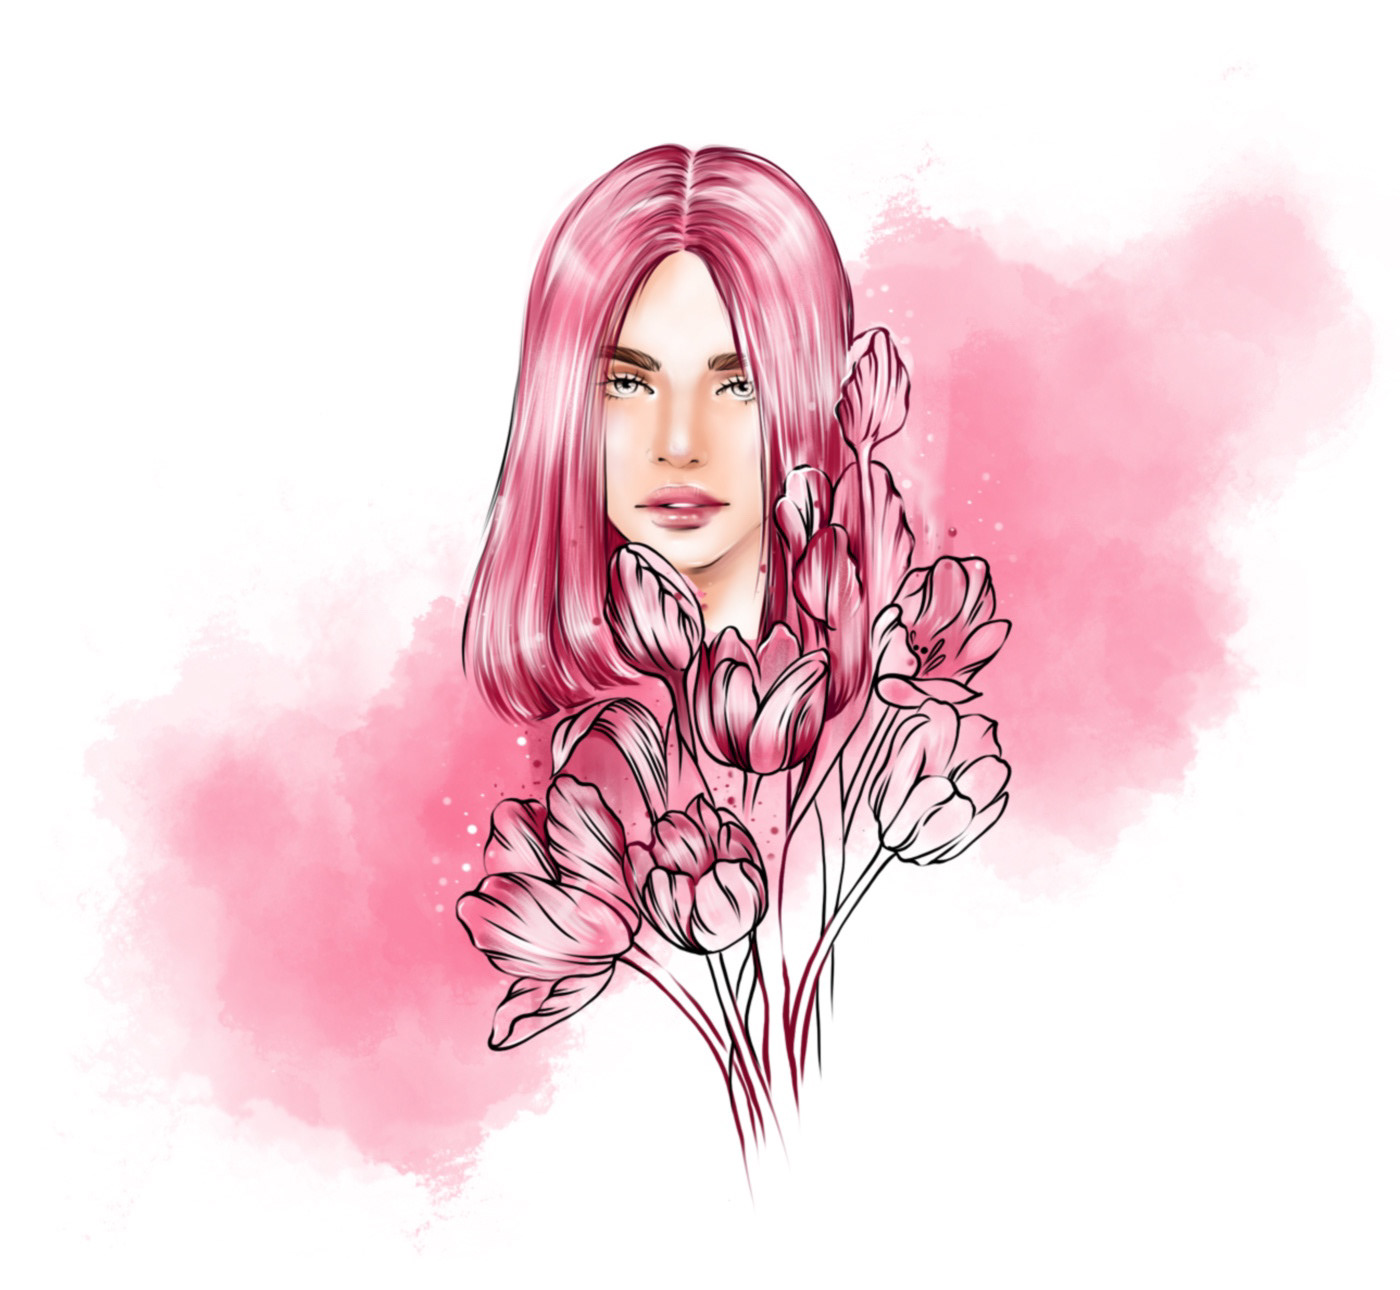 Flower - inspired beauty.
   Women and flowers!
   I mentally draw an association between them.